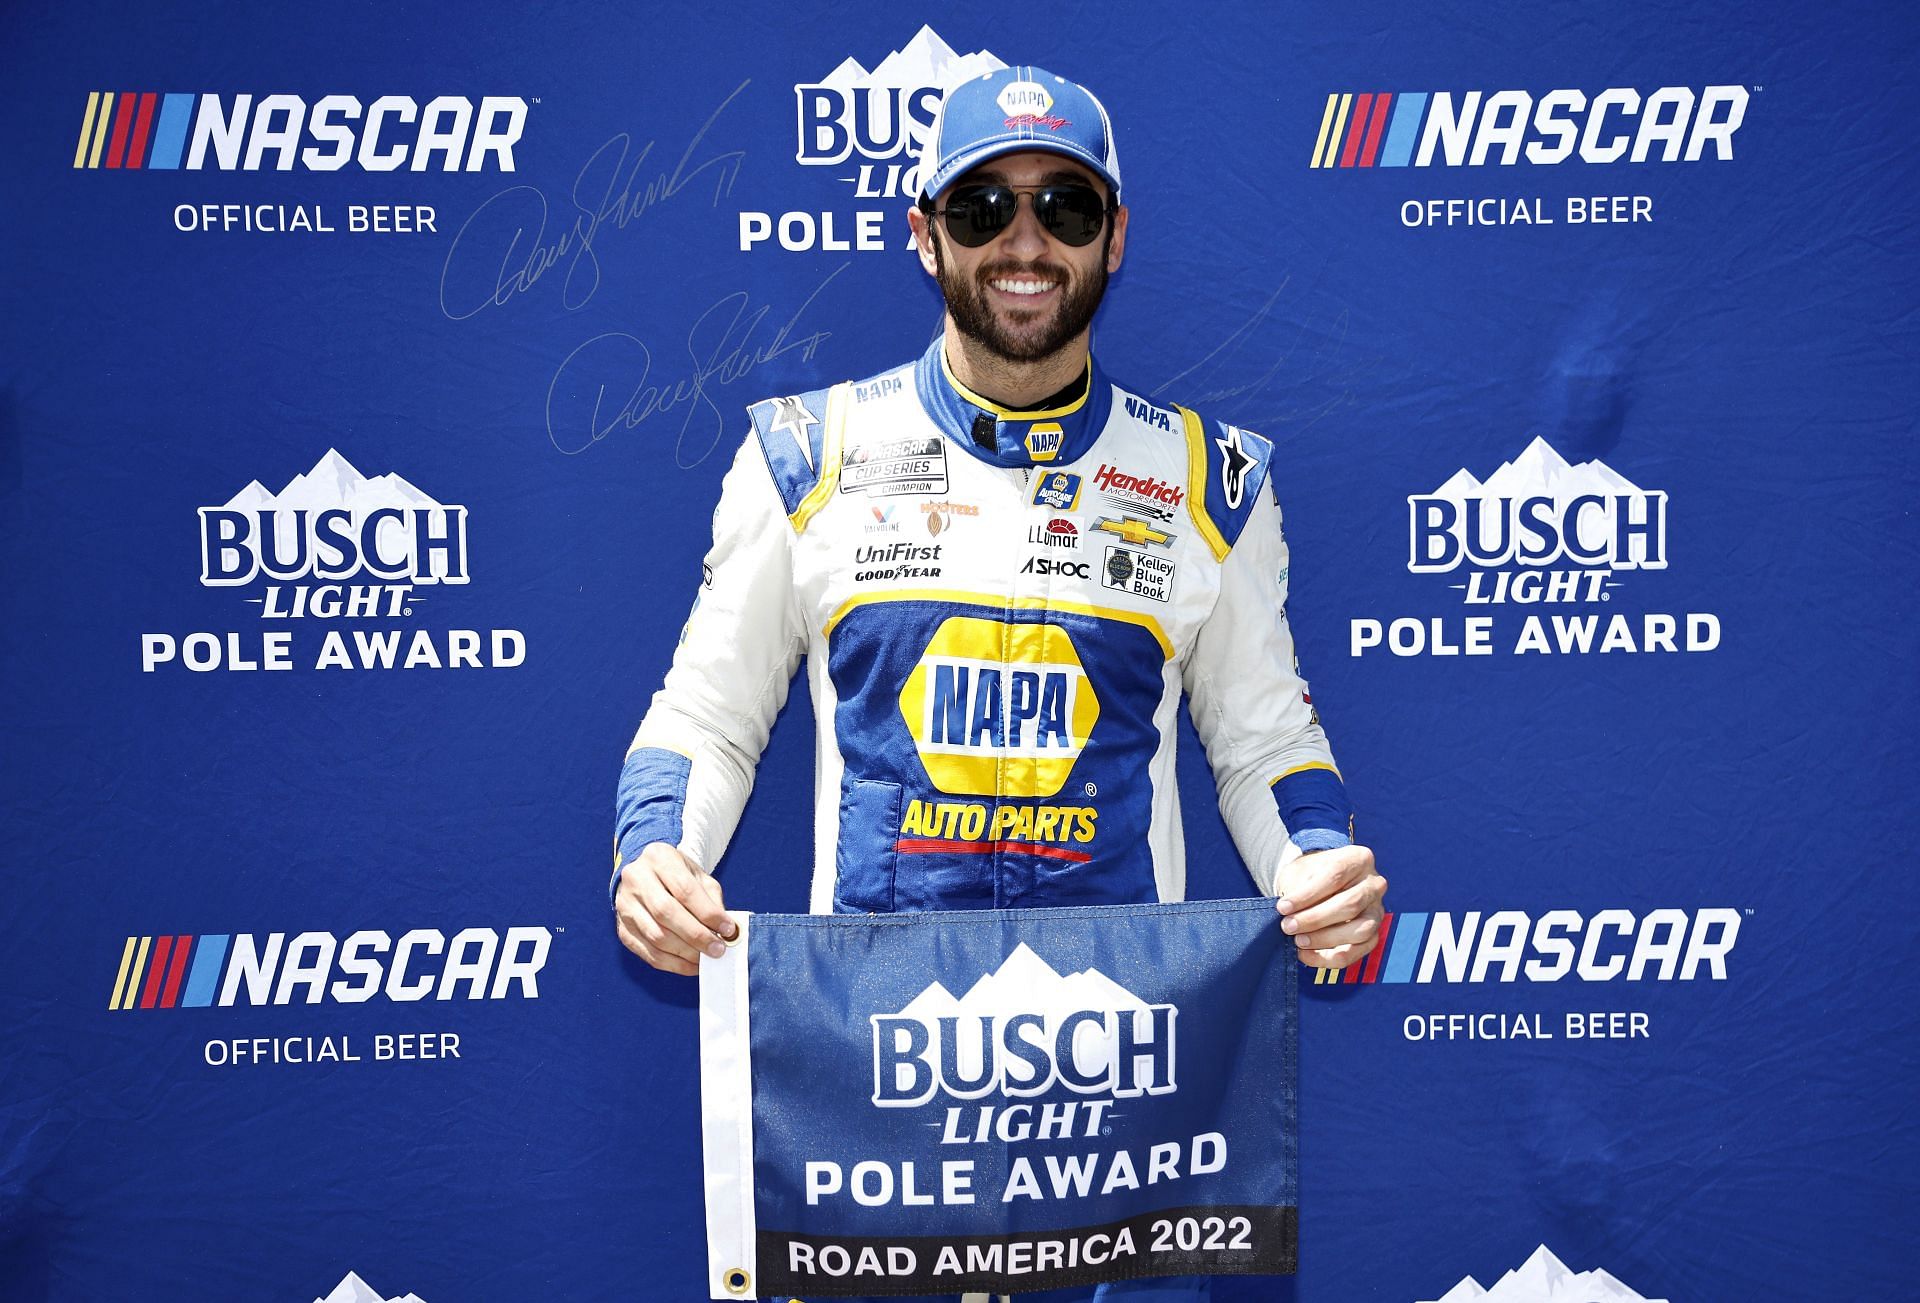 Chase Elliott poses for photos after winning the pole award during qualifying for the NASCAR Cup Series Kwik Trip 250 at Road America (Photo by Sean Gardner/Getty Images)